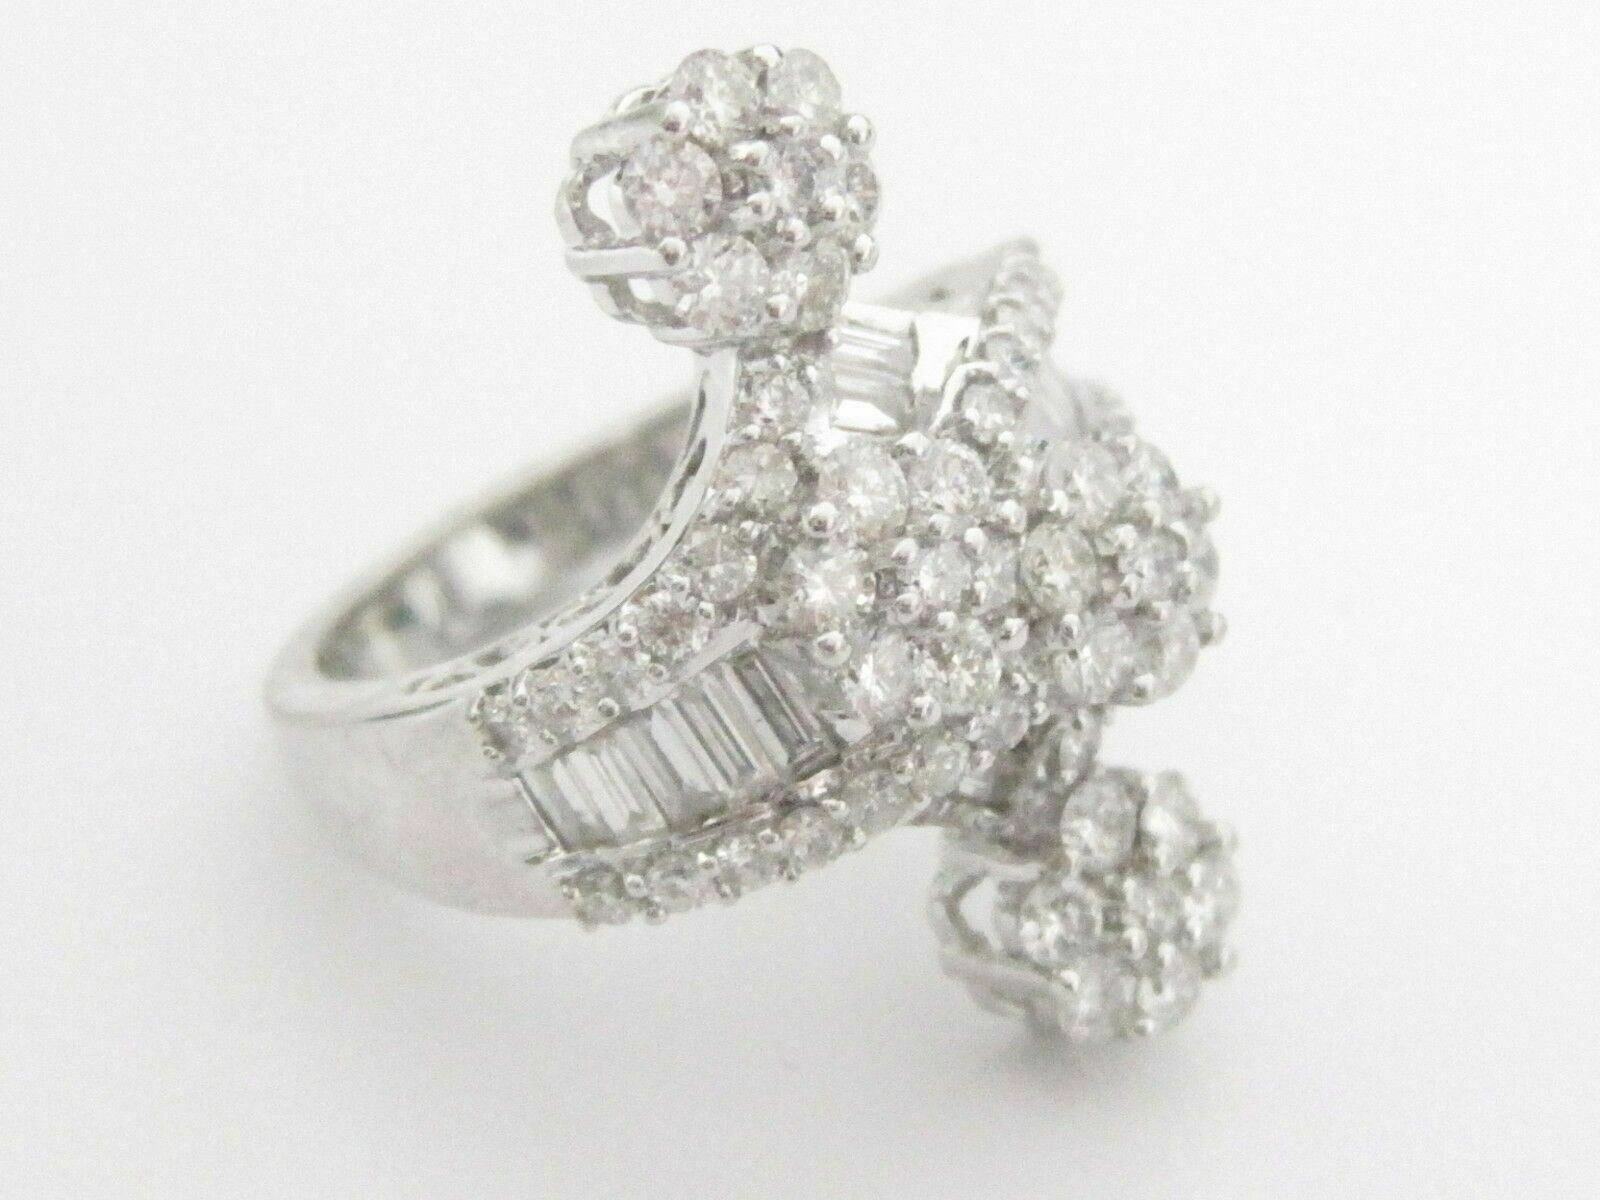 1.85Ct Round & Baguette Diamonds Floral Cluster Cocktail Ring Size 6 18k WGold